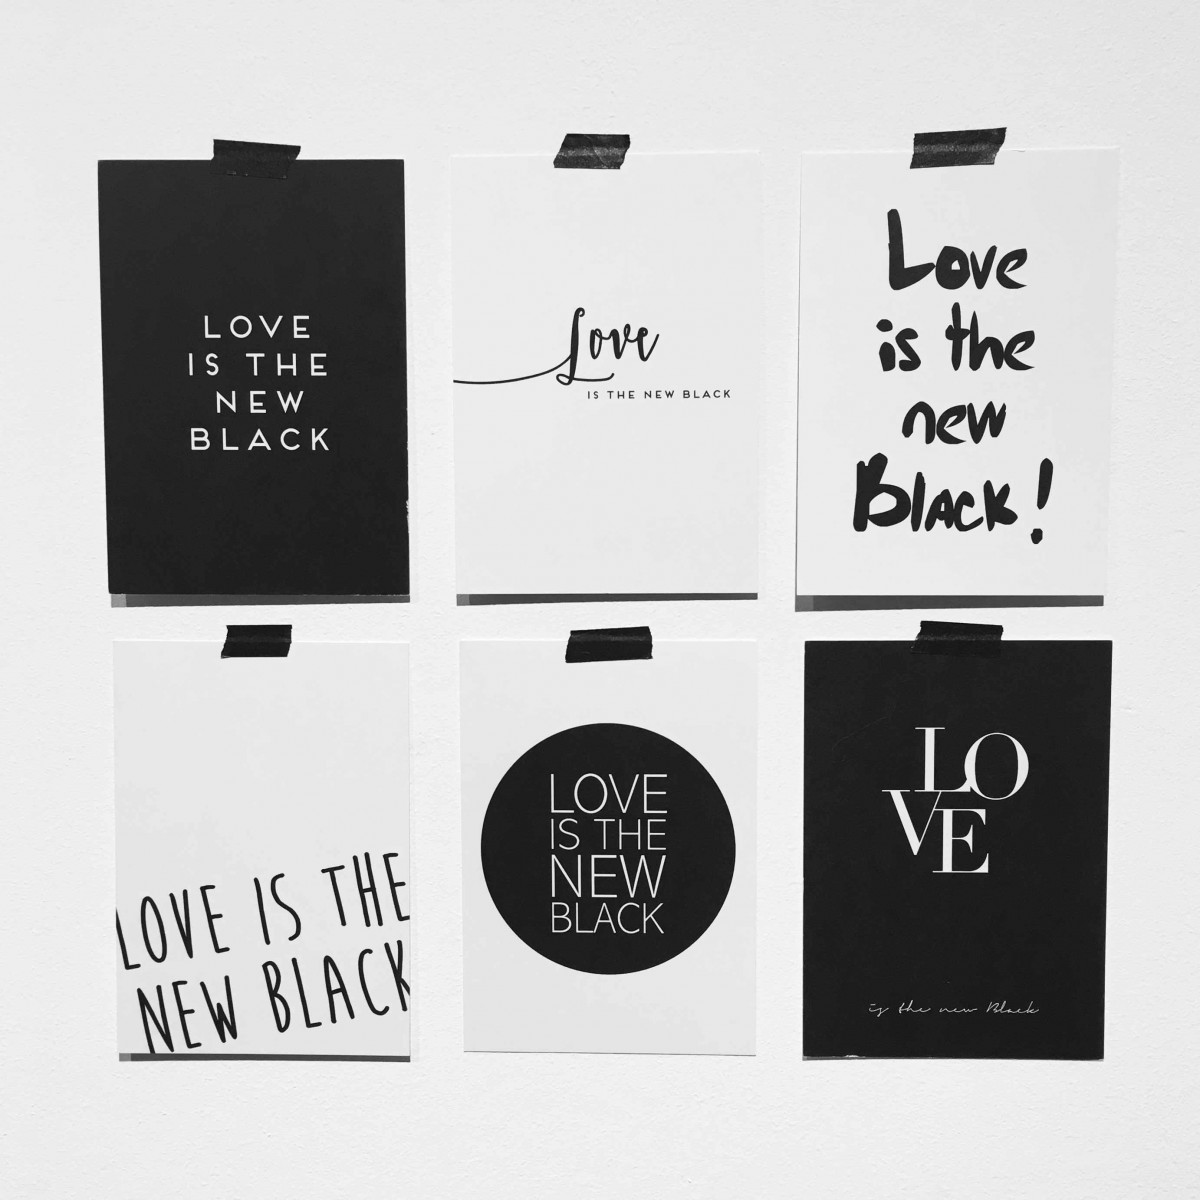 Love is the new black – Postkarten-Set "Love is the new black"